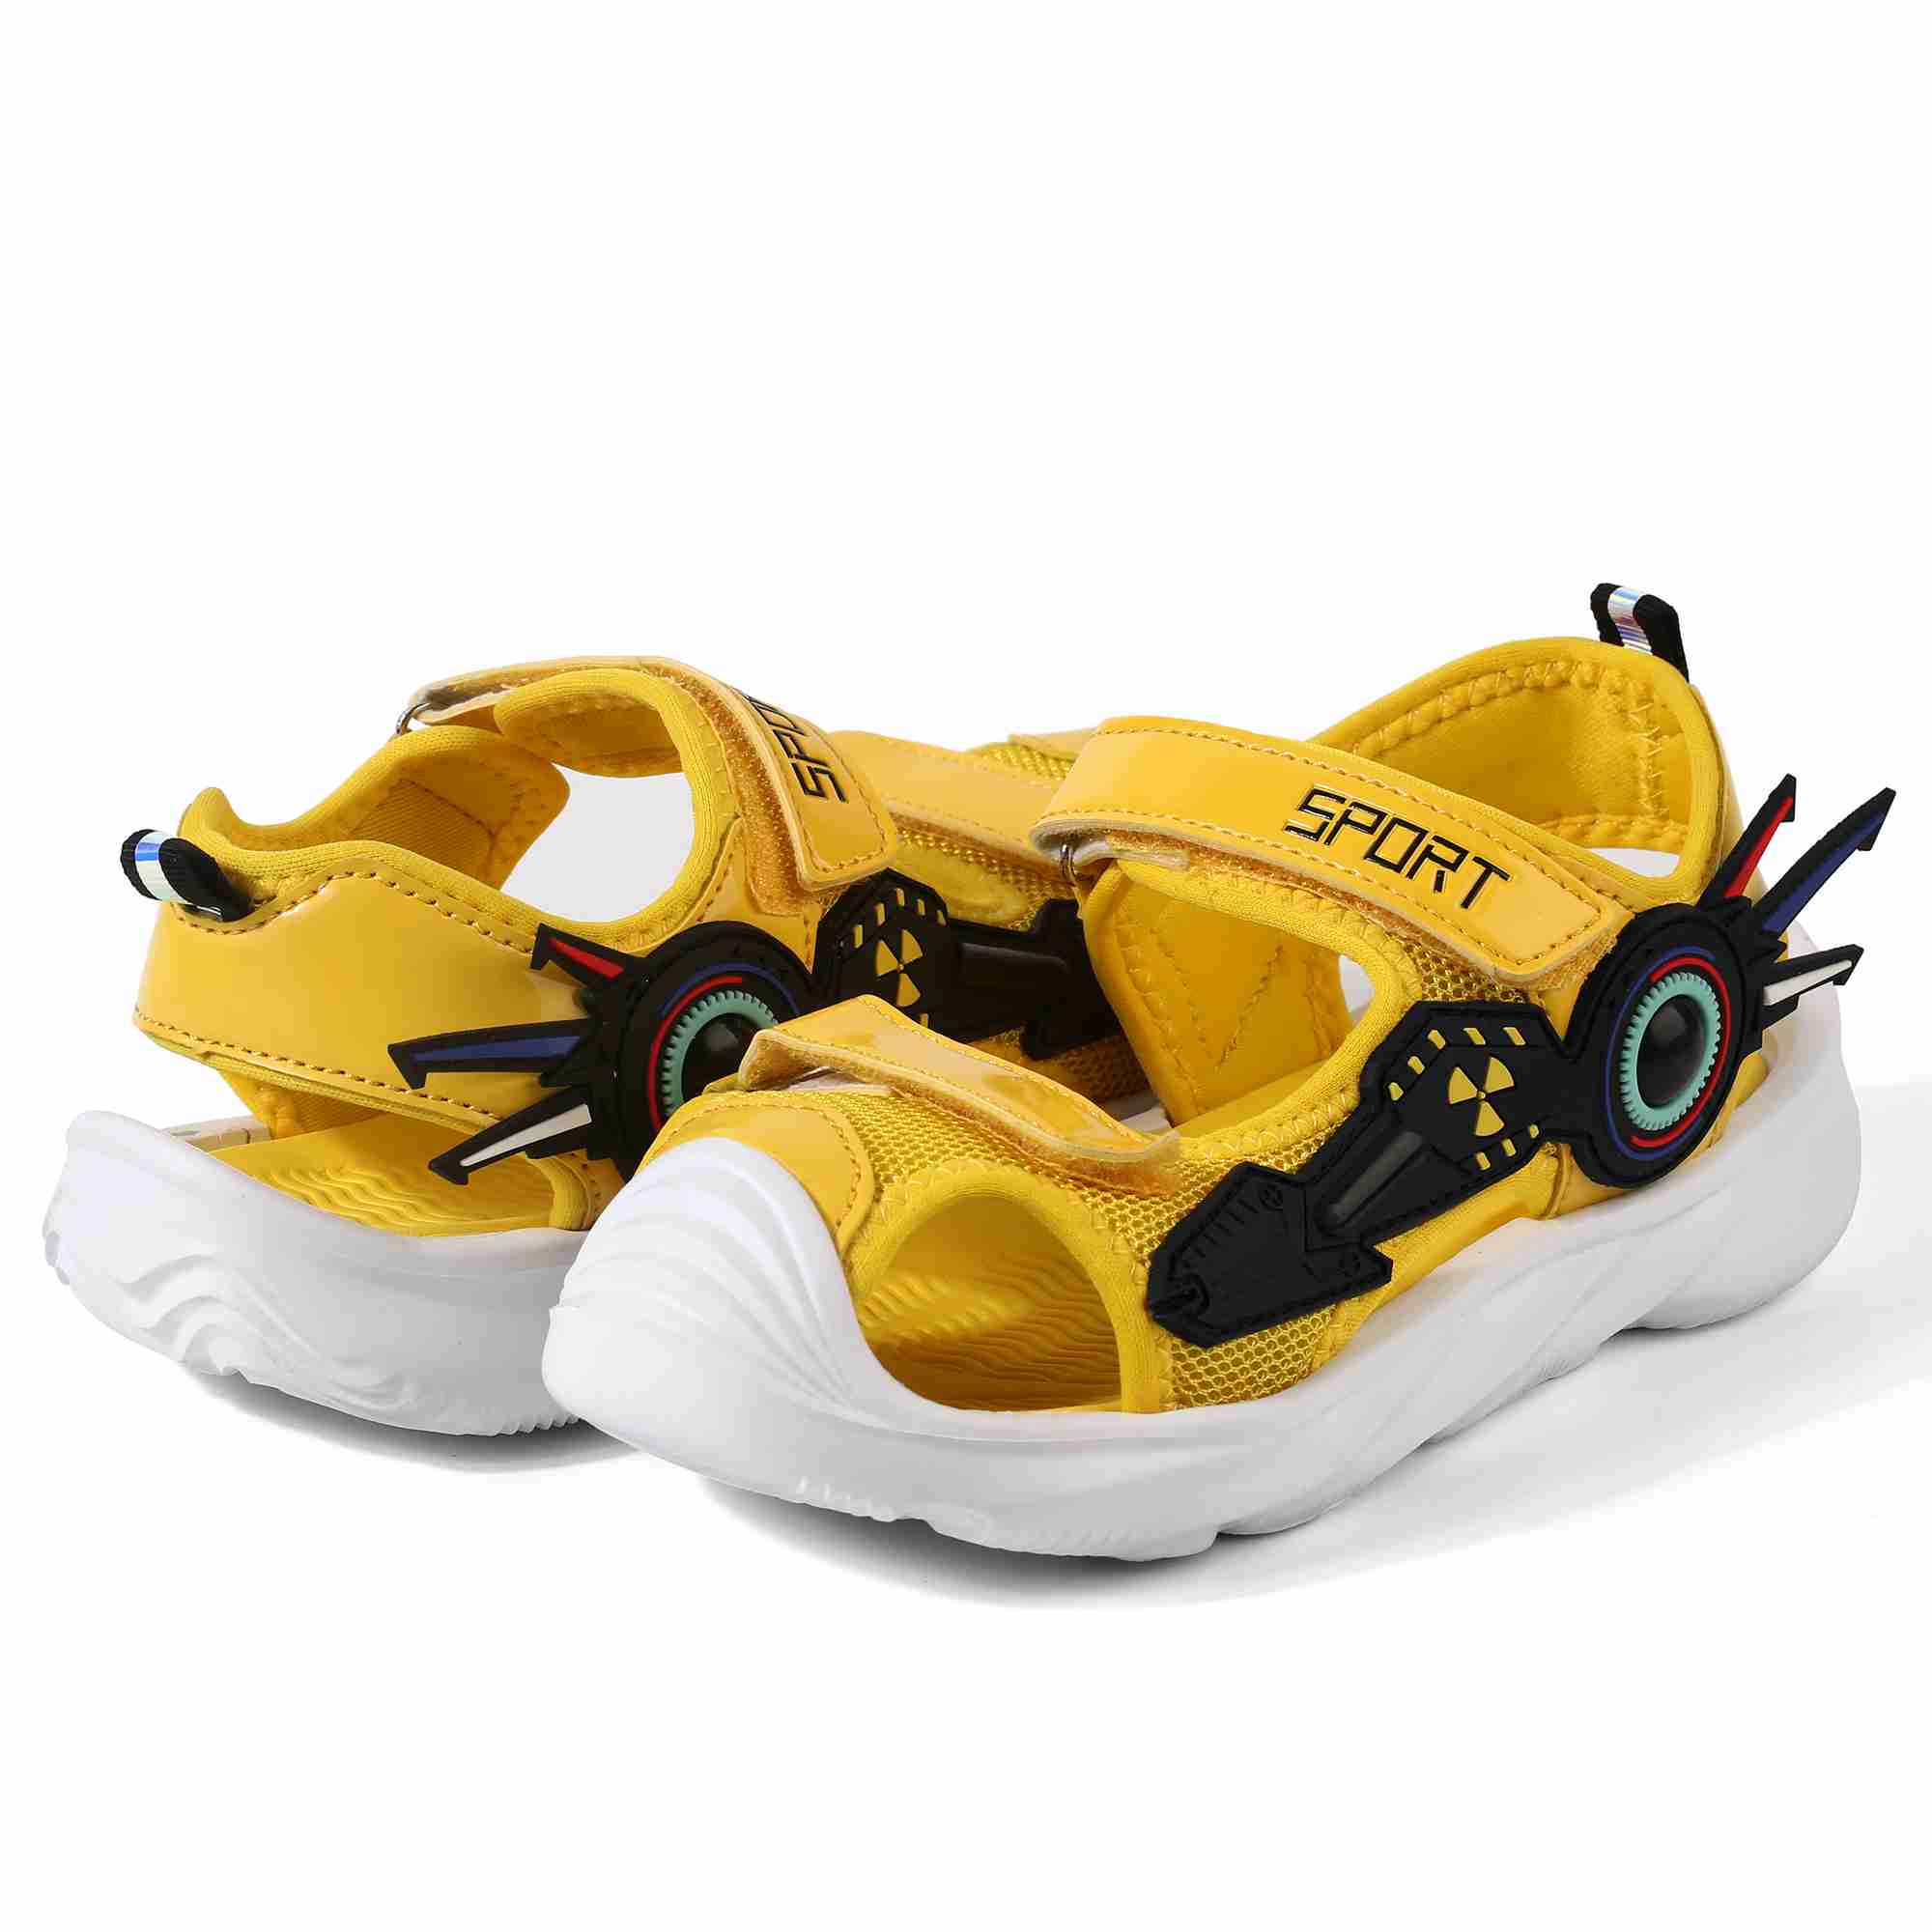 kids-shoes-sandals-for-boys-sandals-for-girls-sandals with discount code